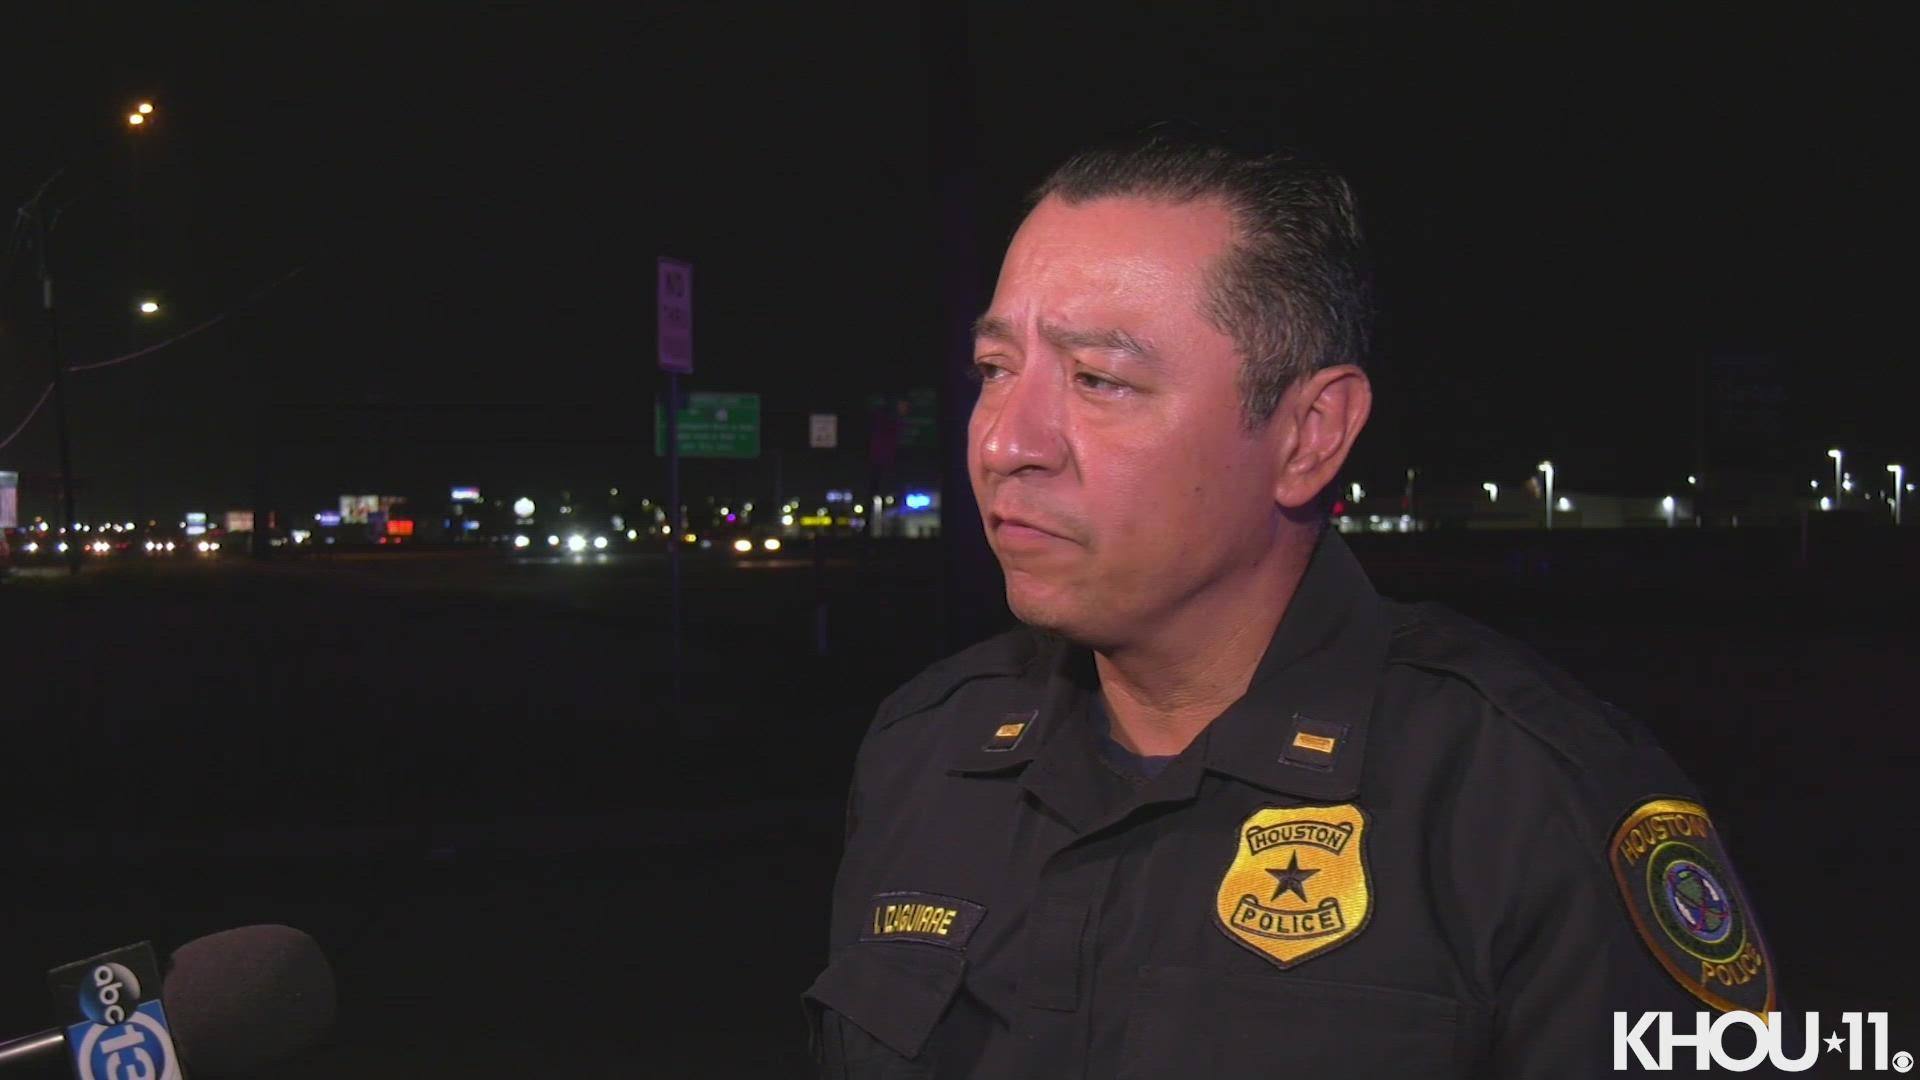 Here are updates from police after a man on a bicycle was shot to death Wednesday night in southeast Houston.